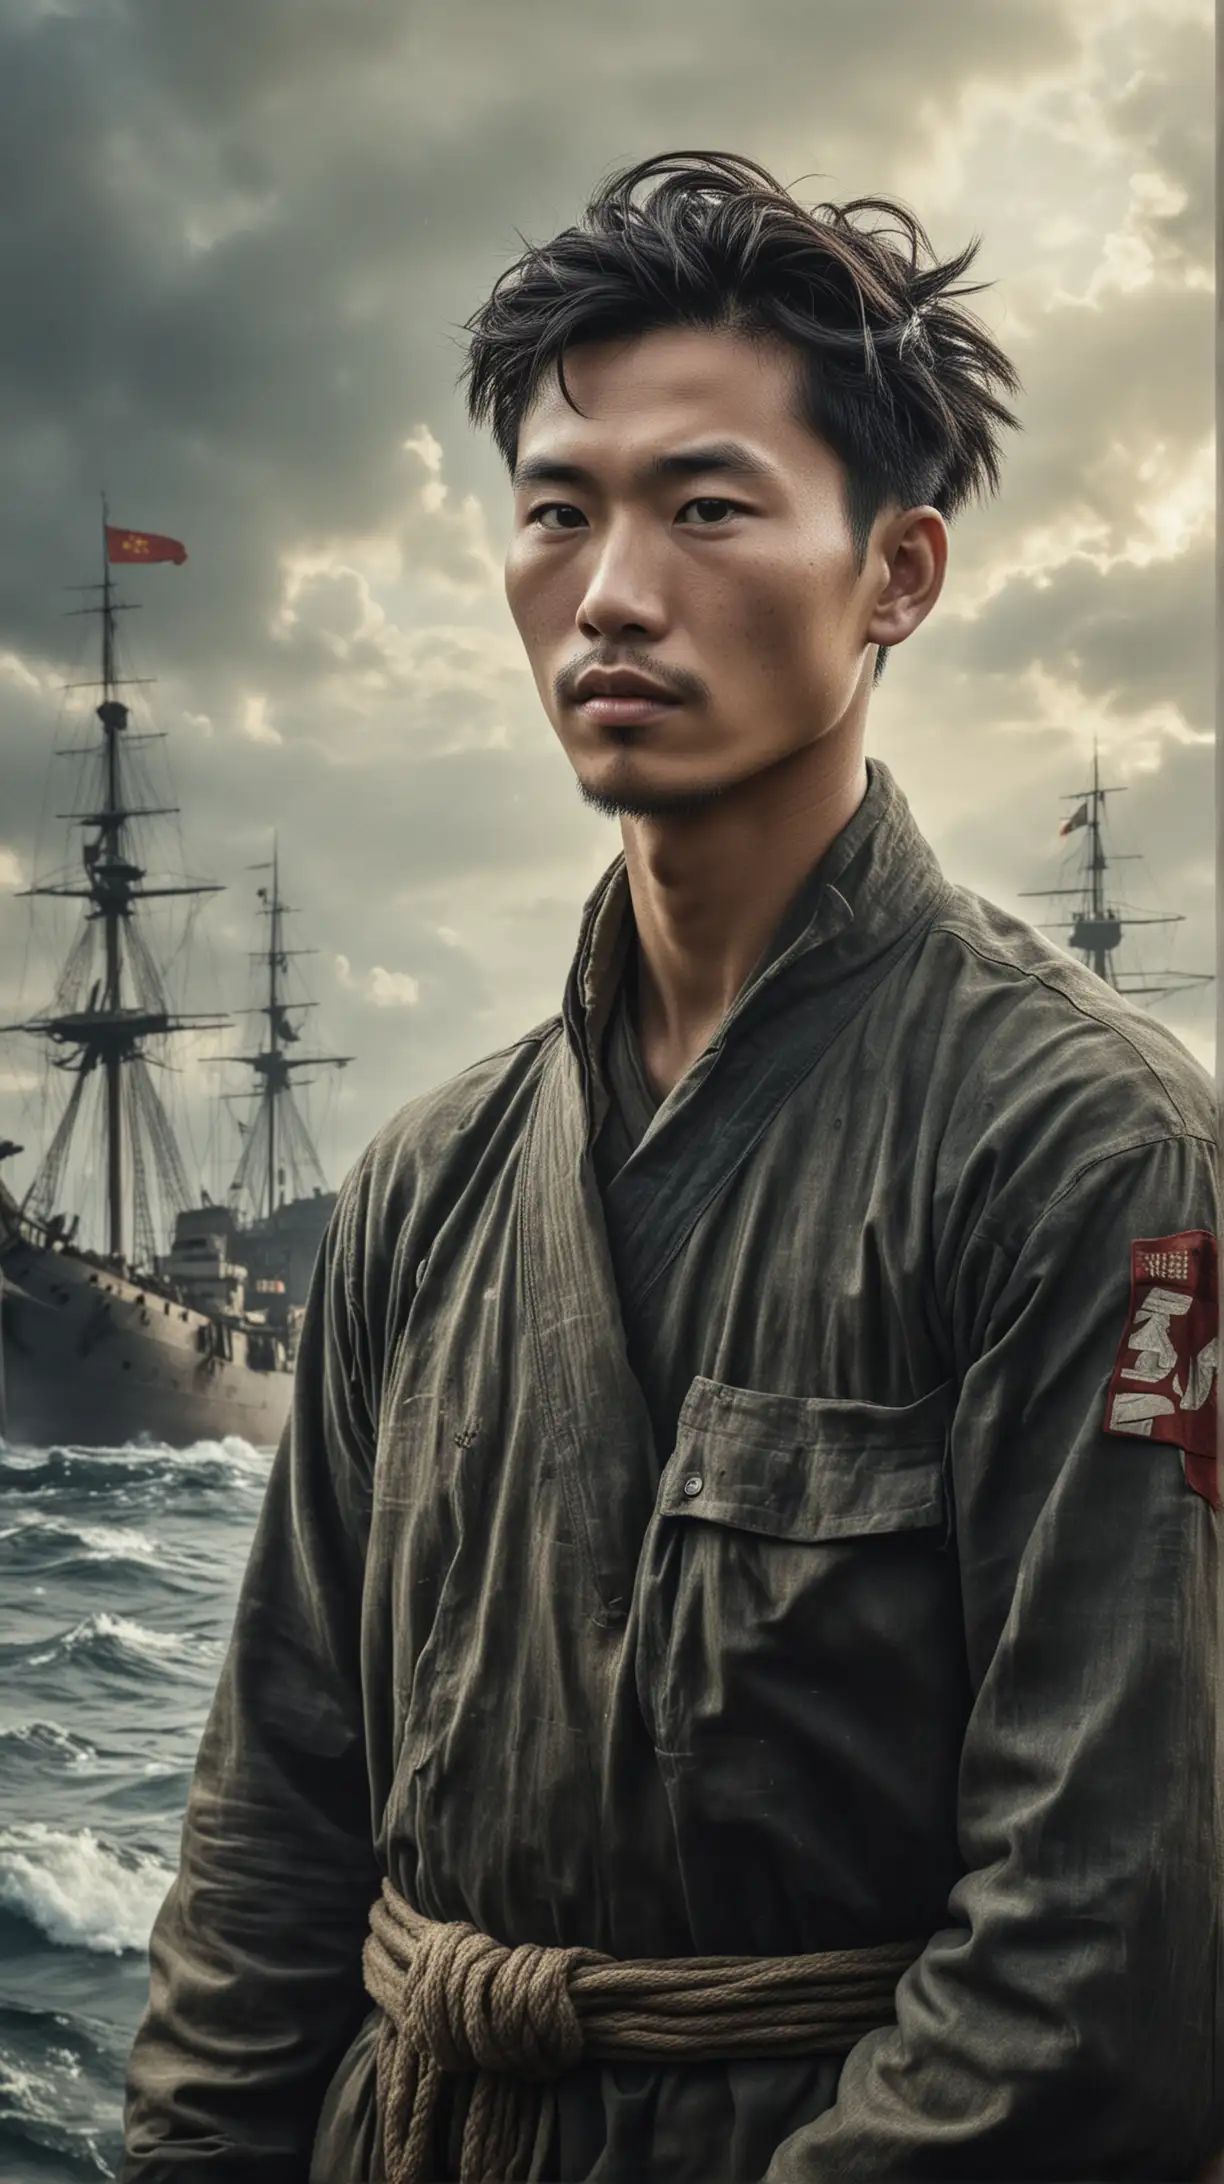 The final image captures 24-year-old Chinese mariner Pan Lyan's enduring legacy in 1942, his story immortalized in the annals of history as a symbol of courage, resilience, and the unyielding will to survive against the greatest of odds.